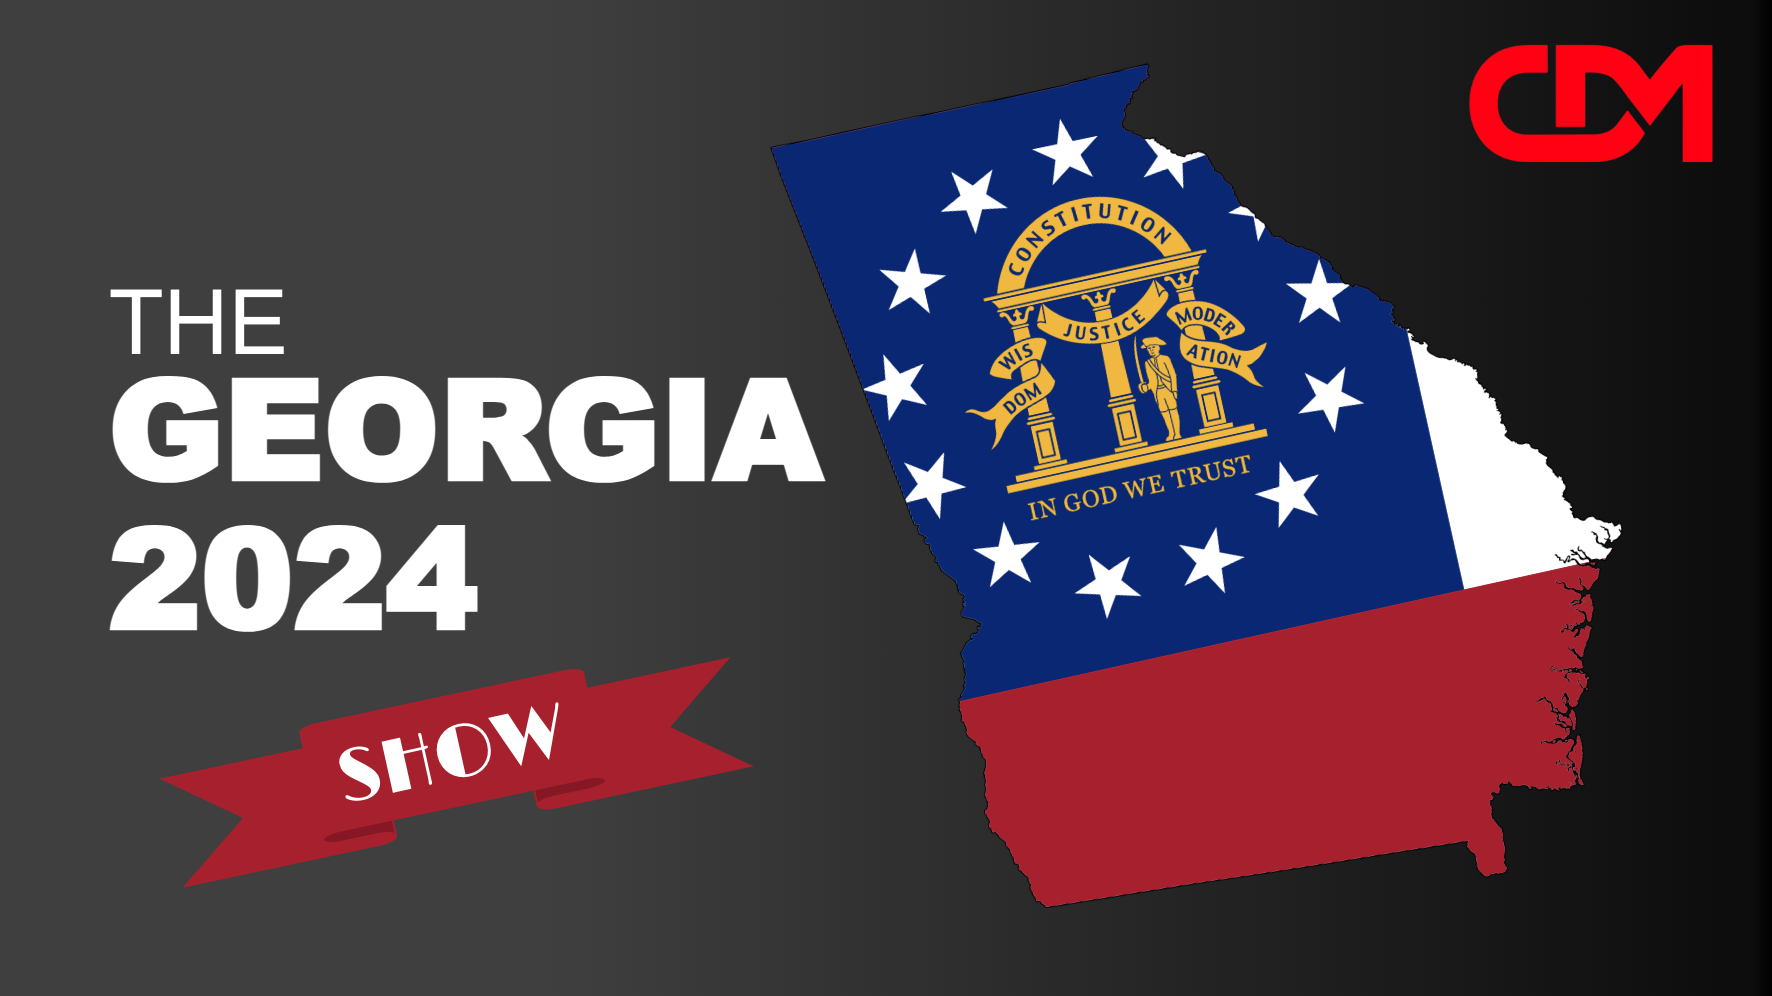 LIVE Wednesday 7:00pm EDT - The Georgia 2024 Show - John Gordon, Chris Gleason With L Todd Wood And Bill Quinn